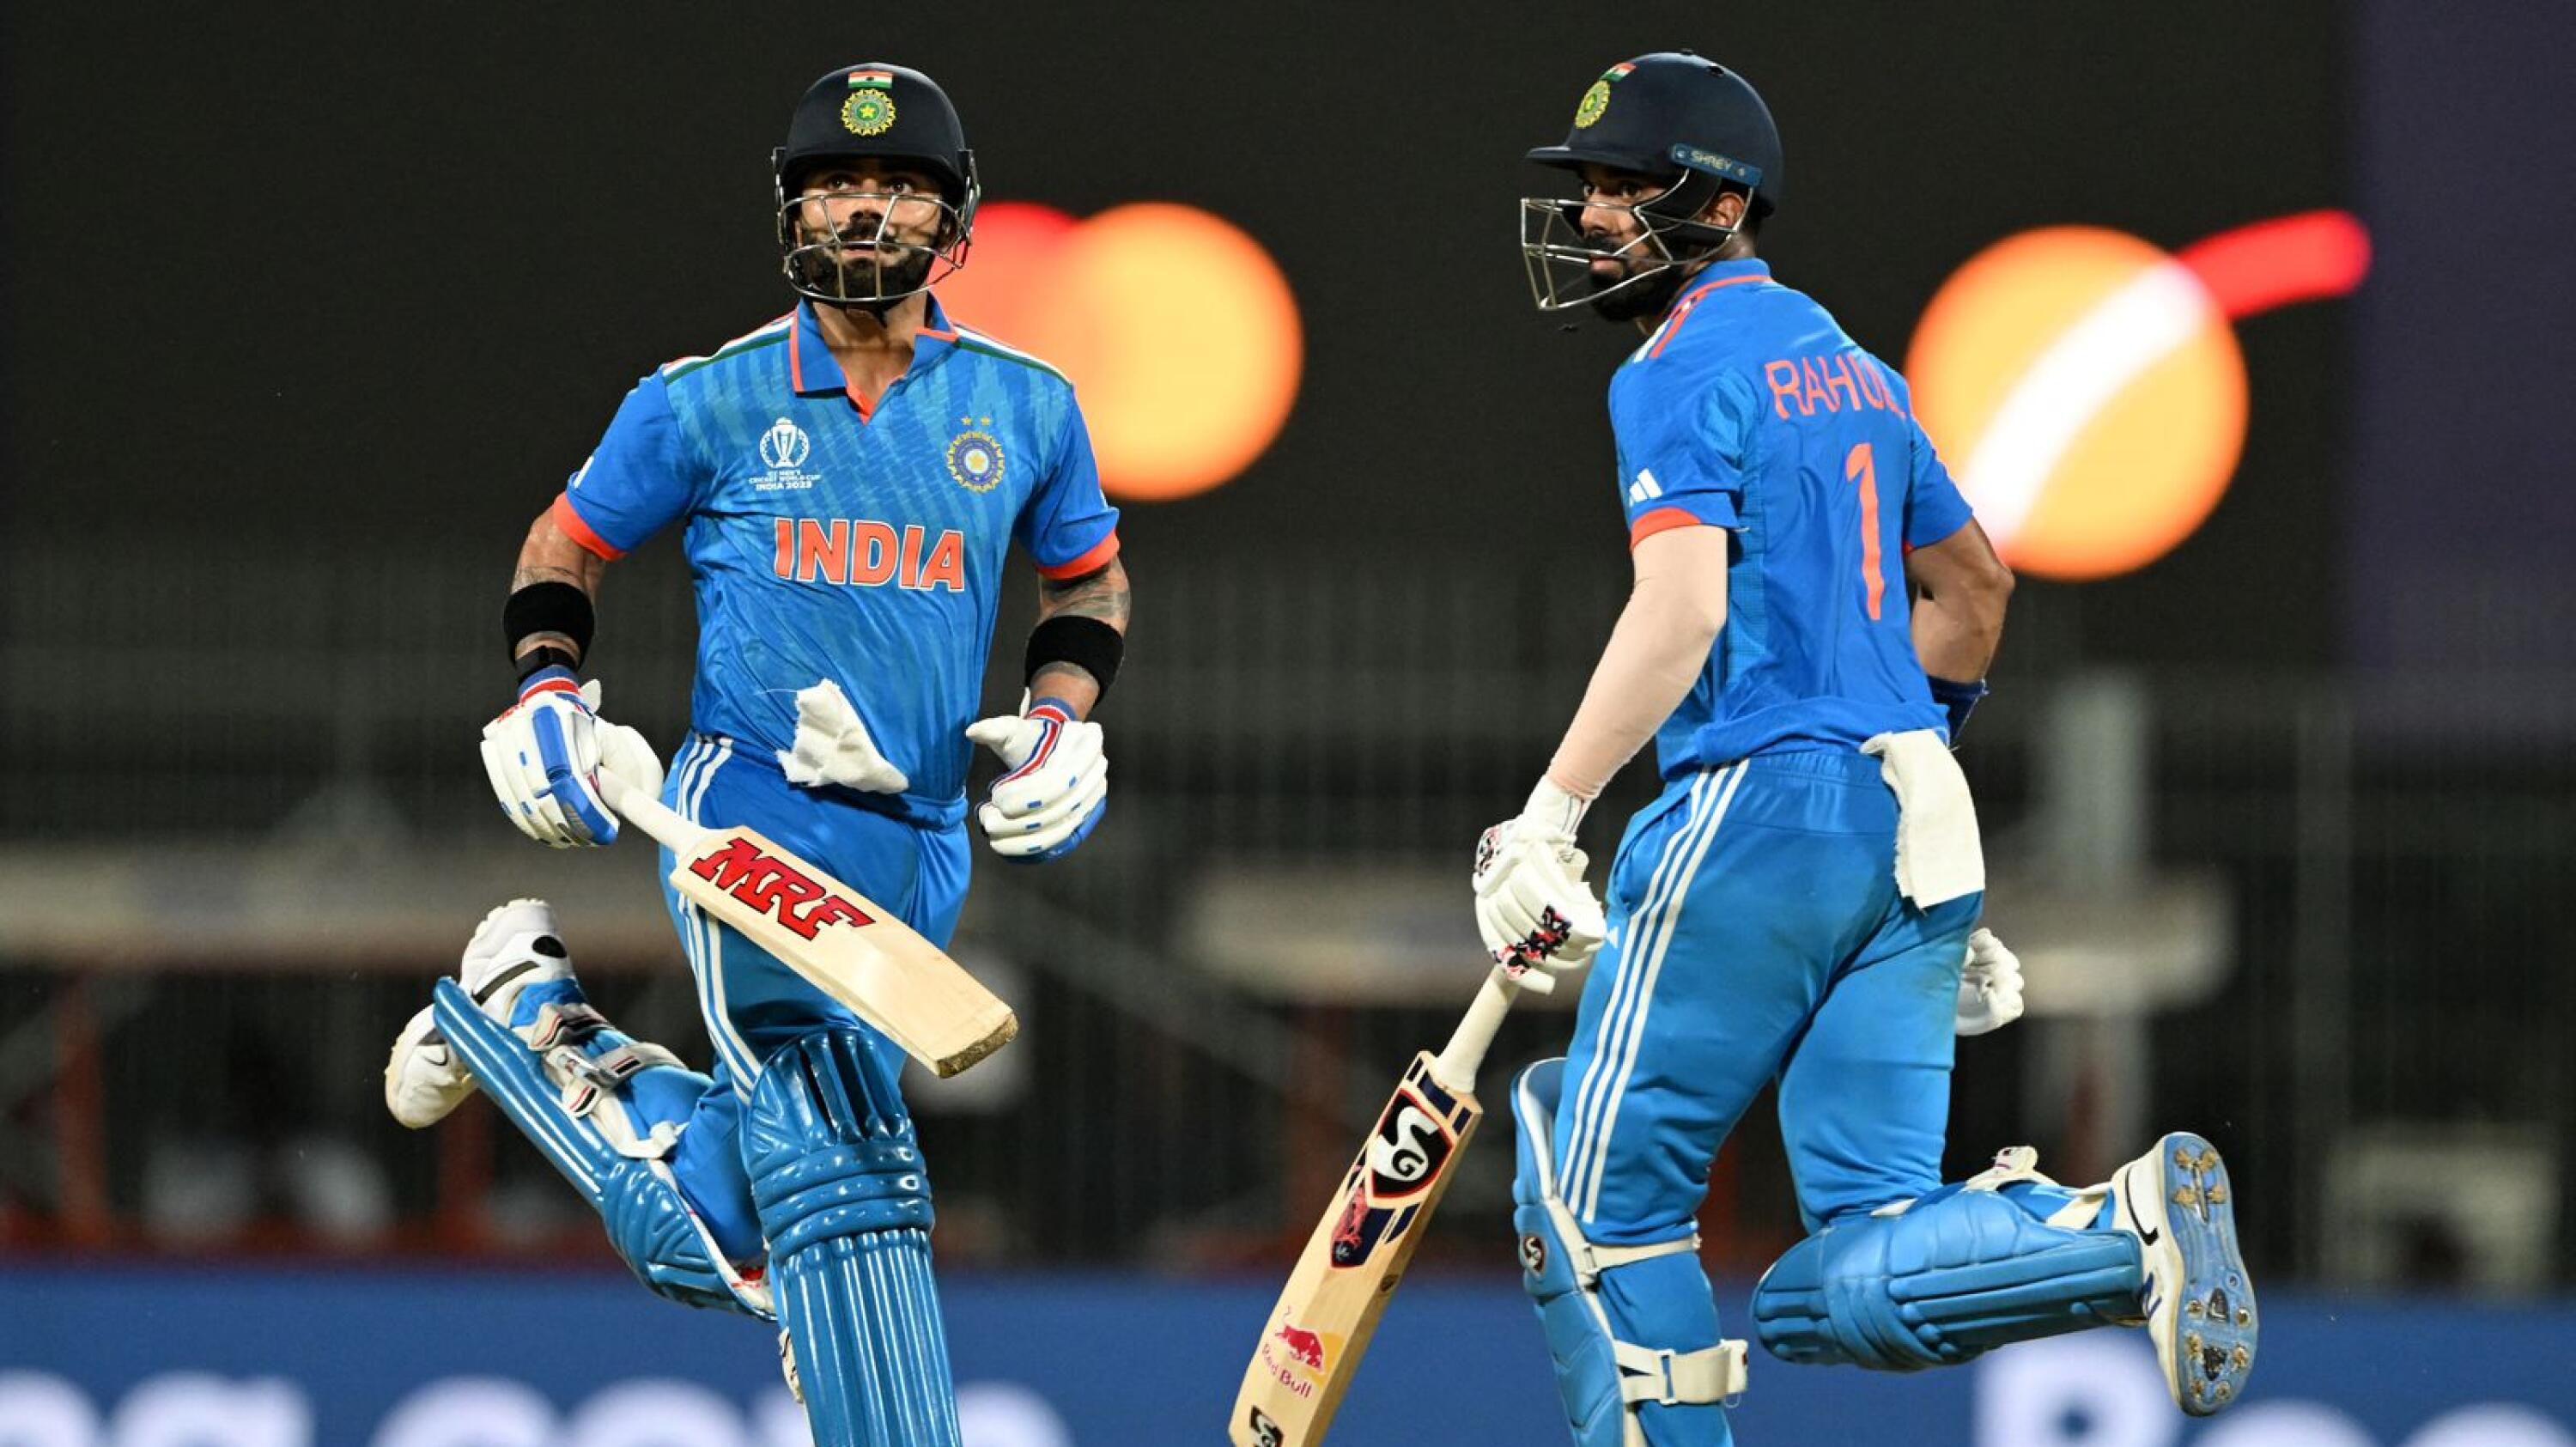 India's Virat Kohli and KL Rahul run between the wickets during their Cricket World Cup match against Australia